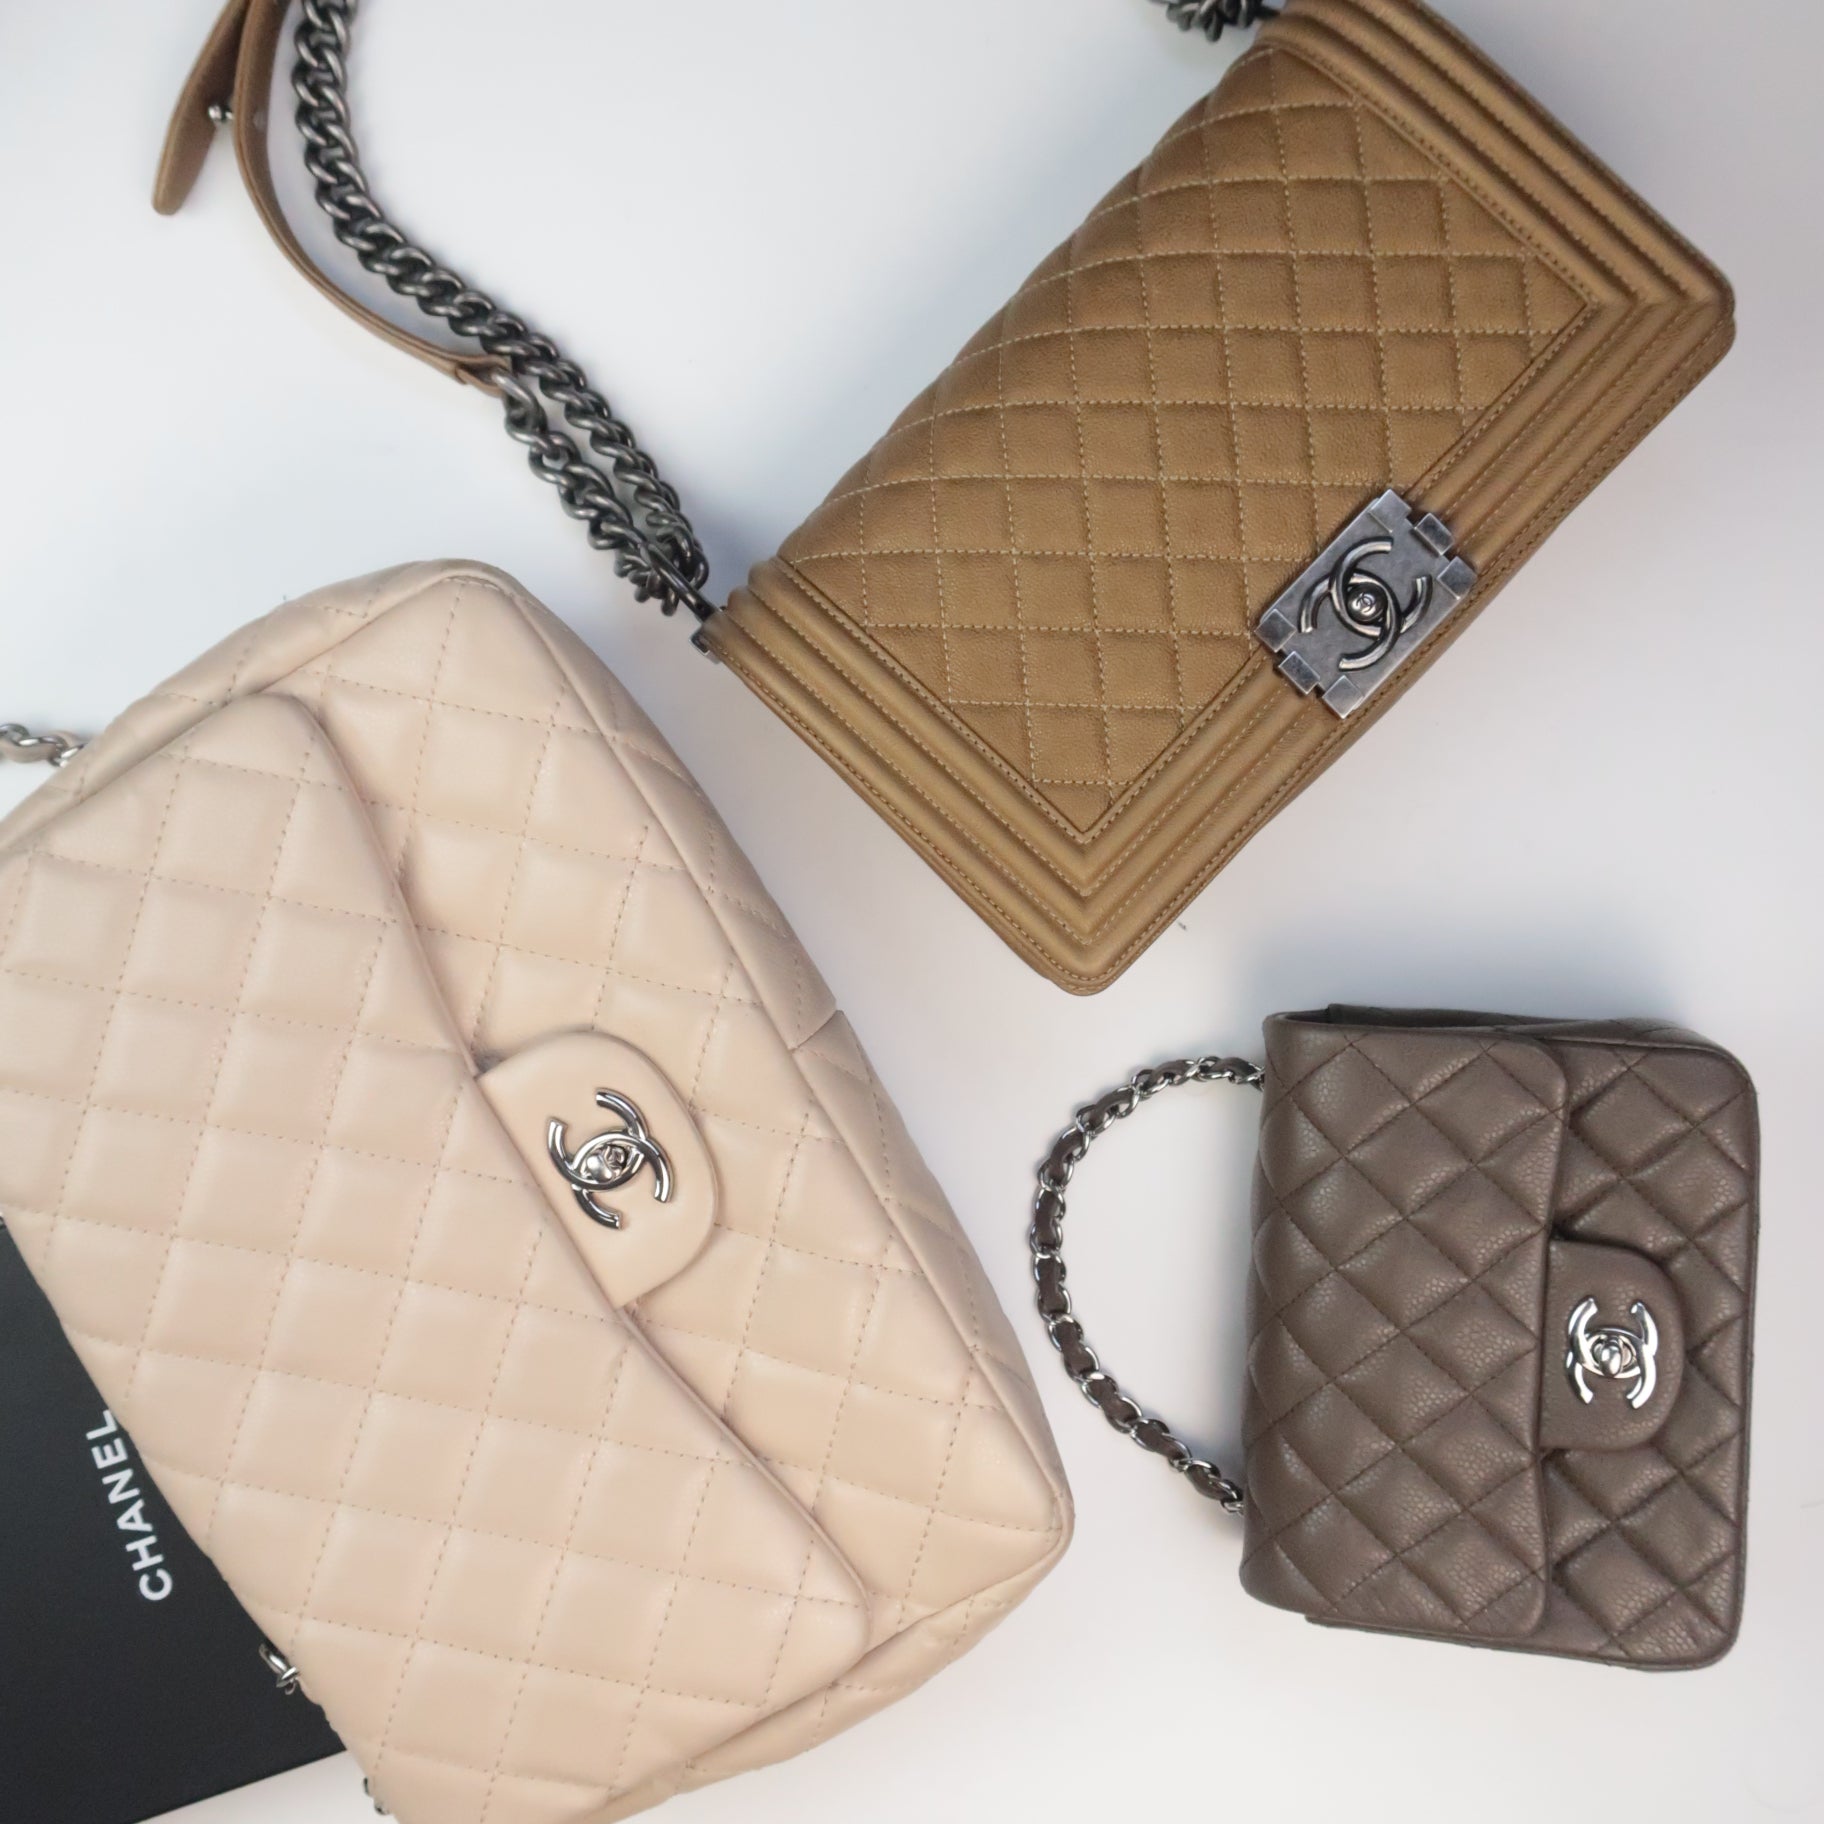 Chanel Boy Bag Review – Mad about the Small Boy? - Unwrapped